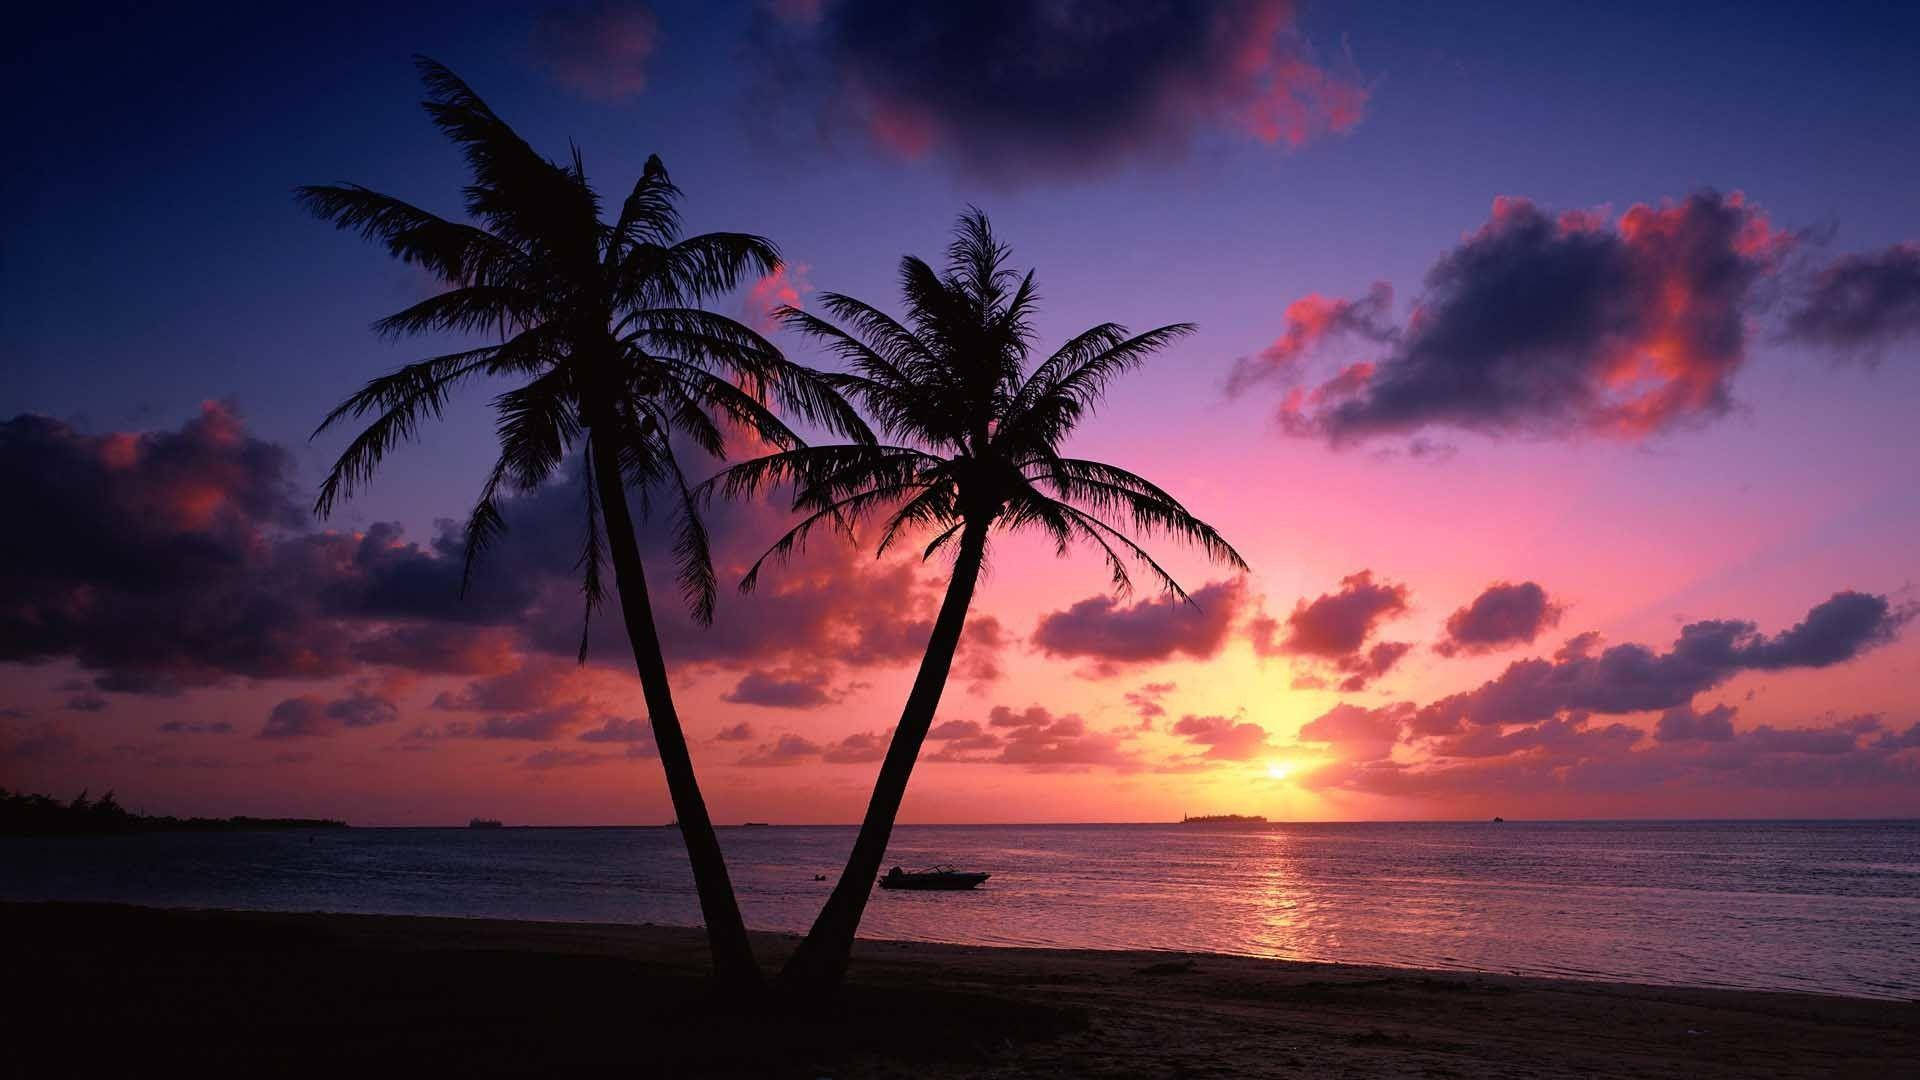 Aesthetic Sunset With Palm Tree Silhouettes